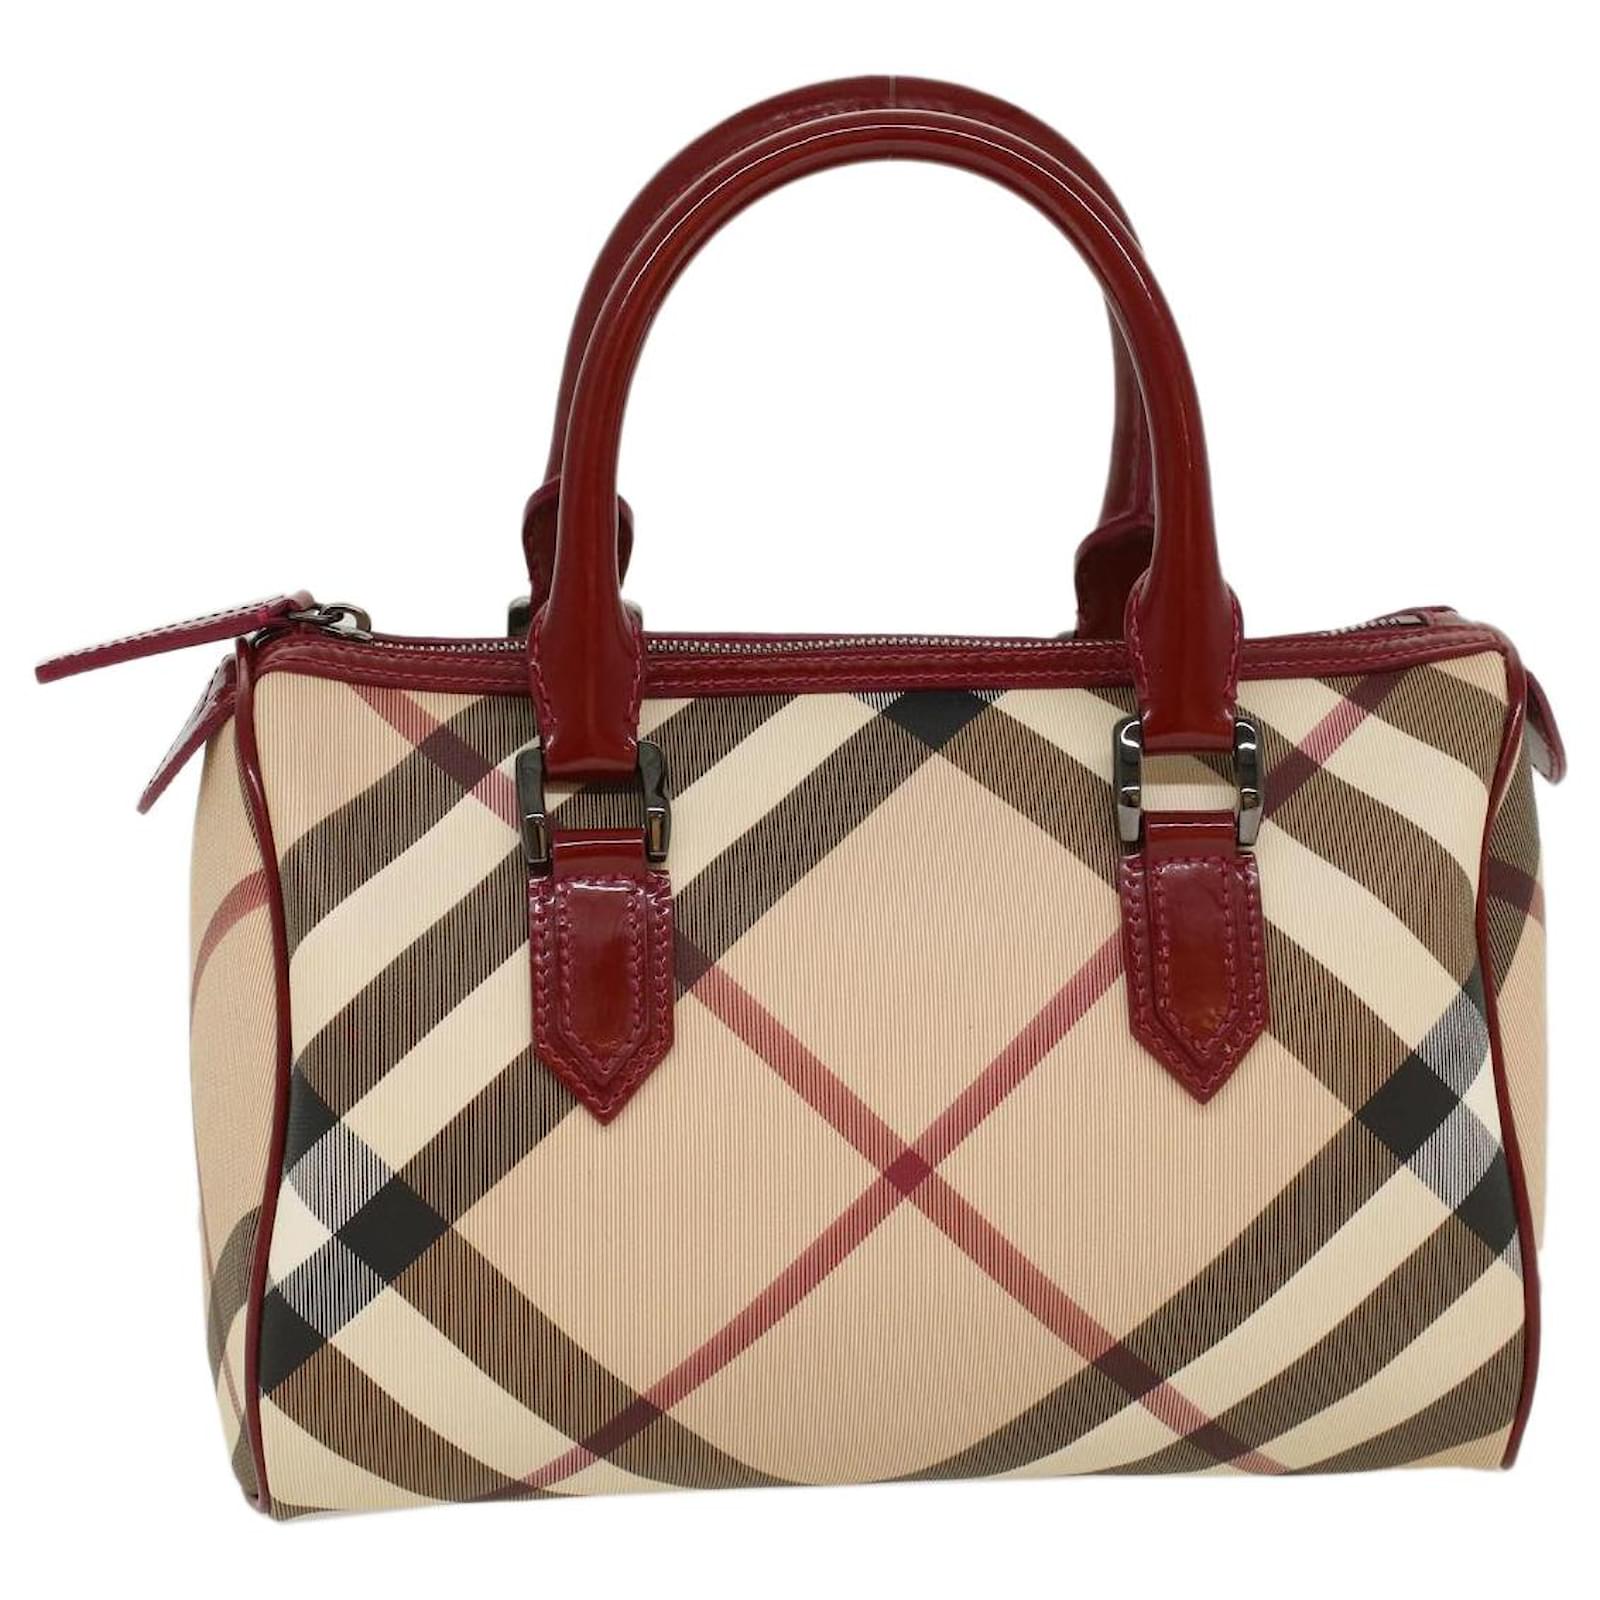 Bowling Bag - Burberry - Leather - Beige